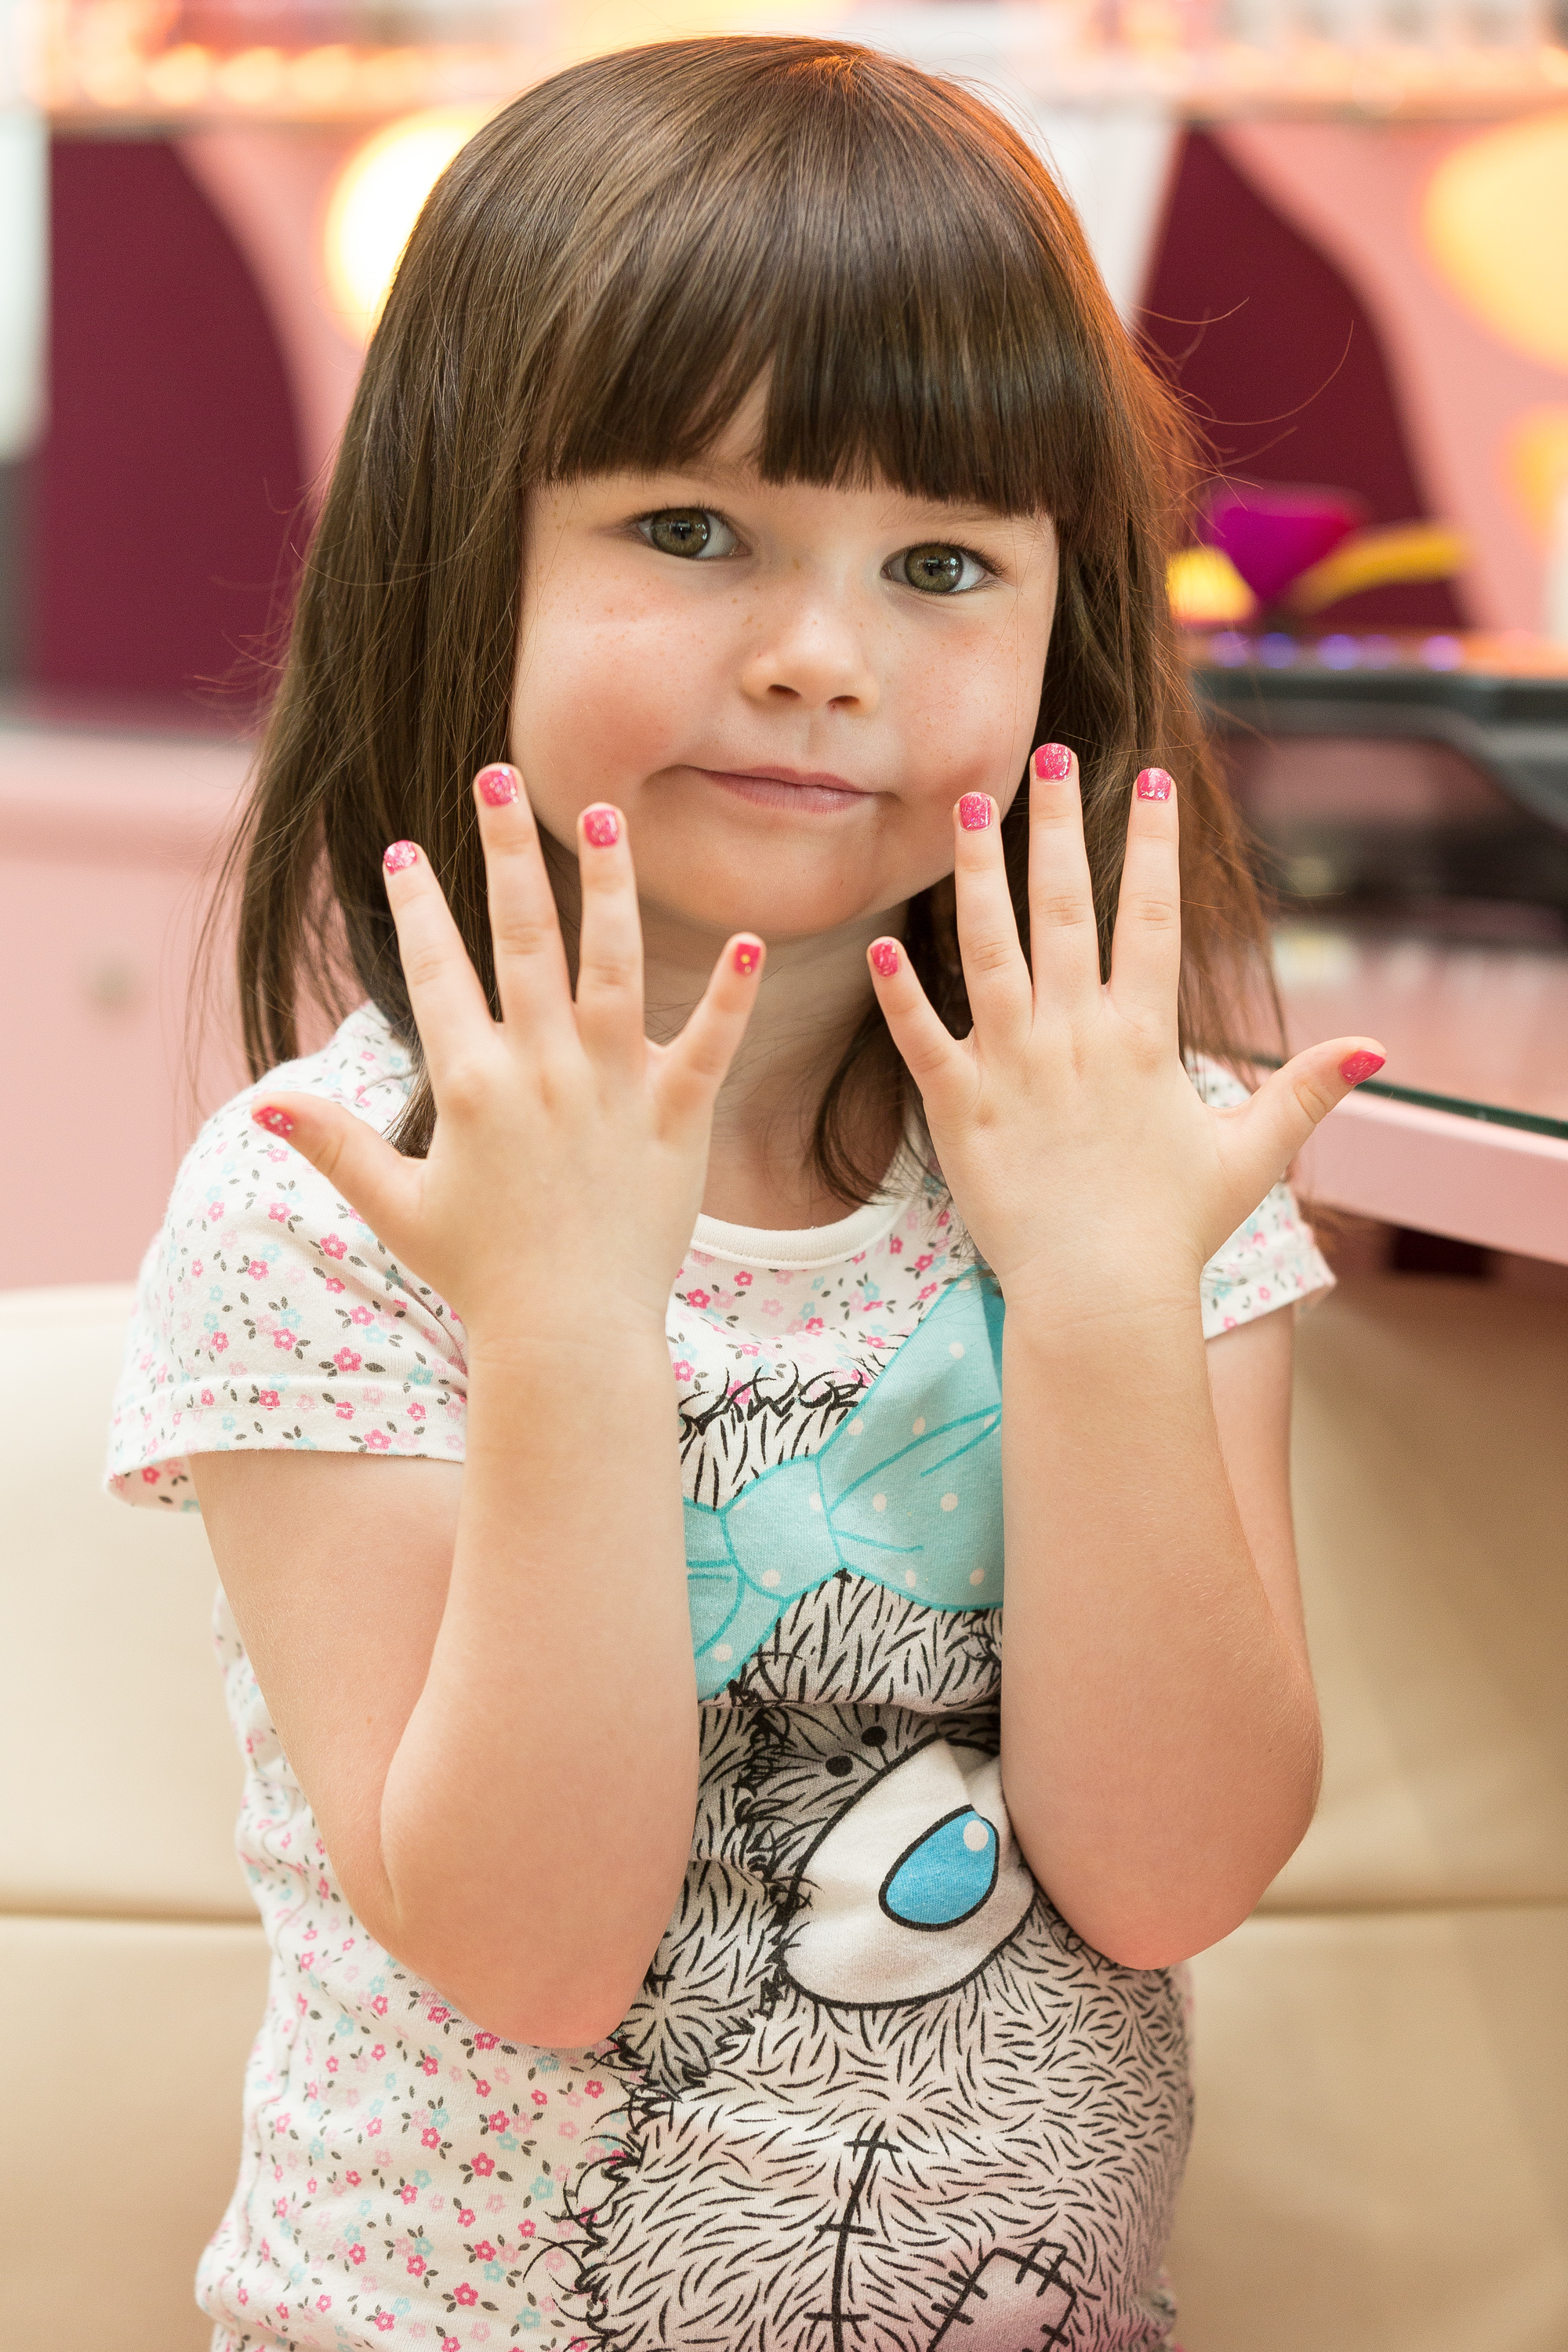 Children's manicures make debut at Stansted Airport